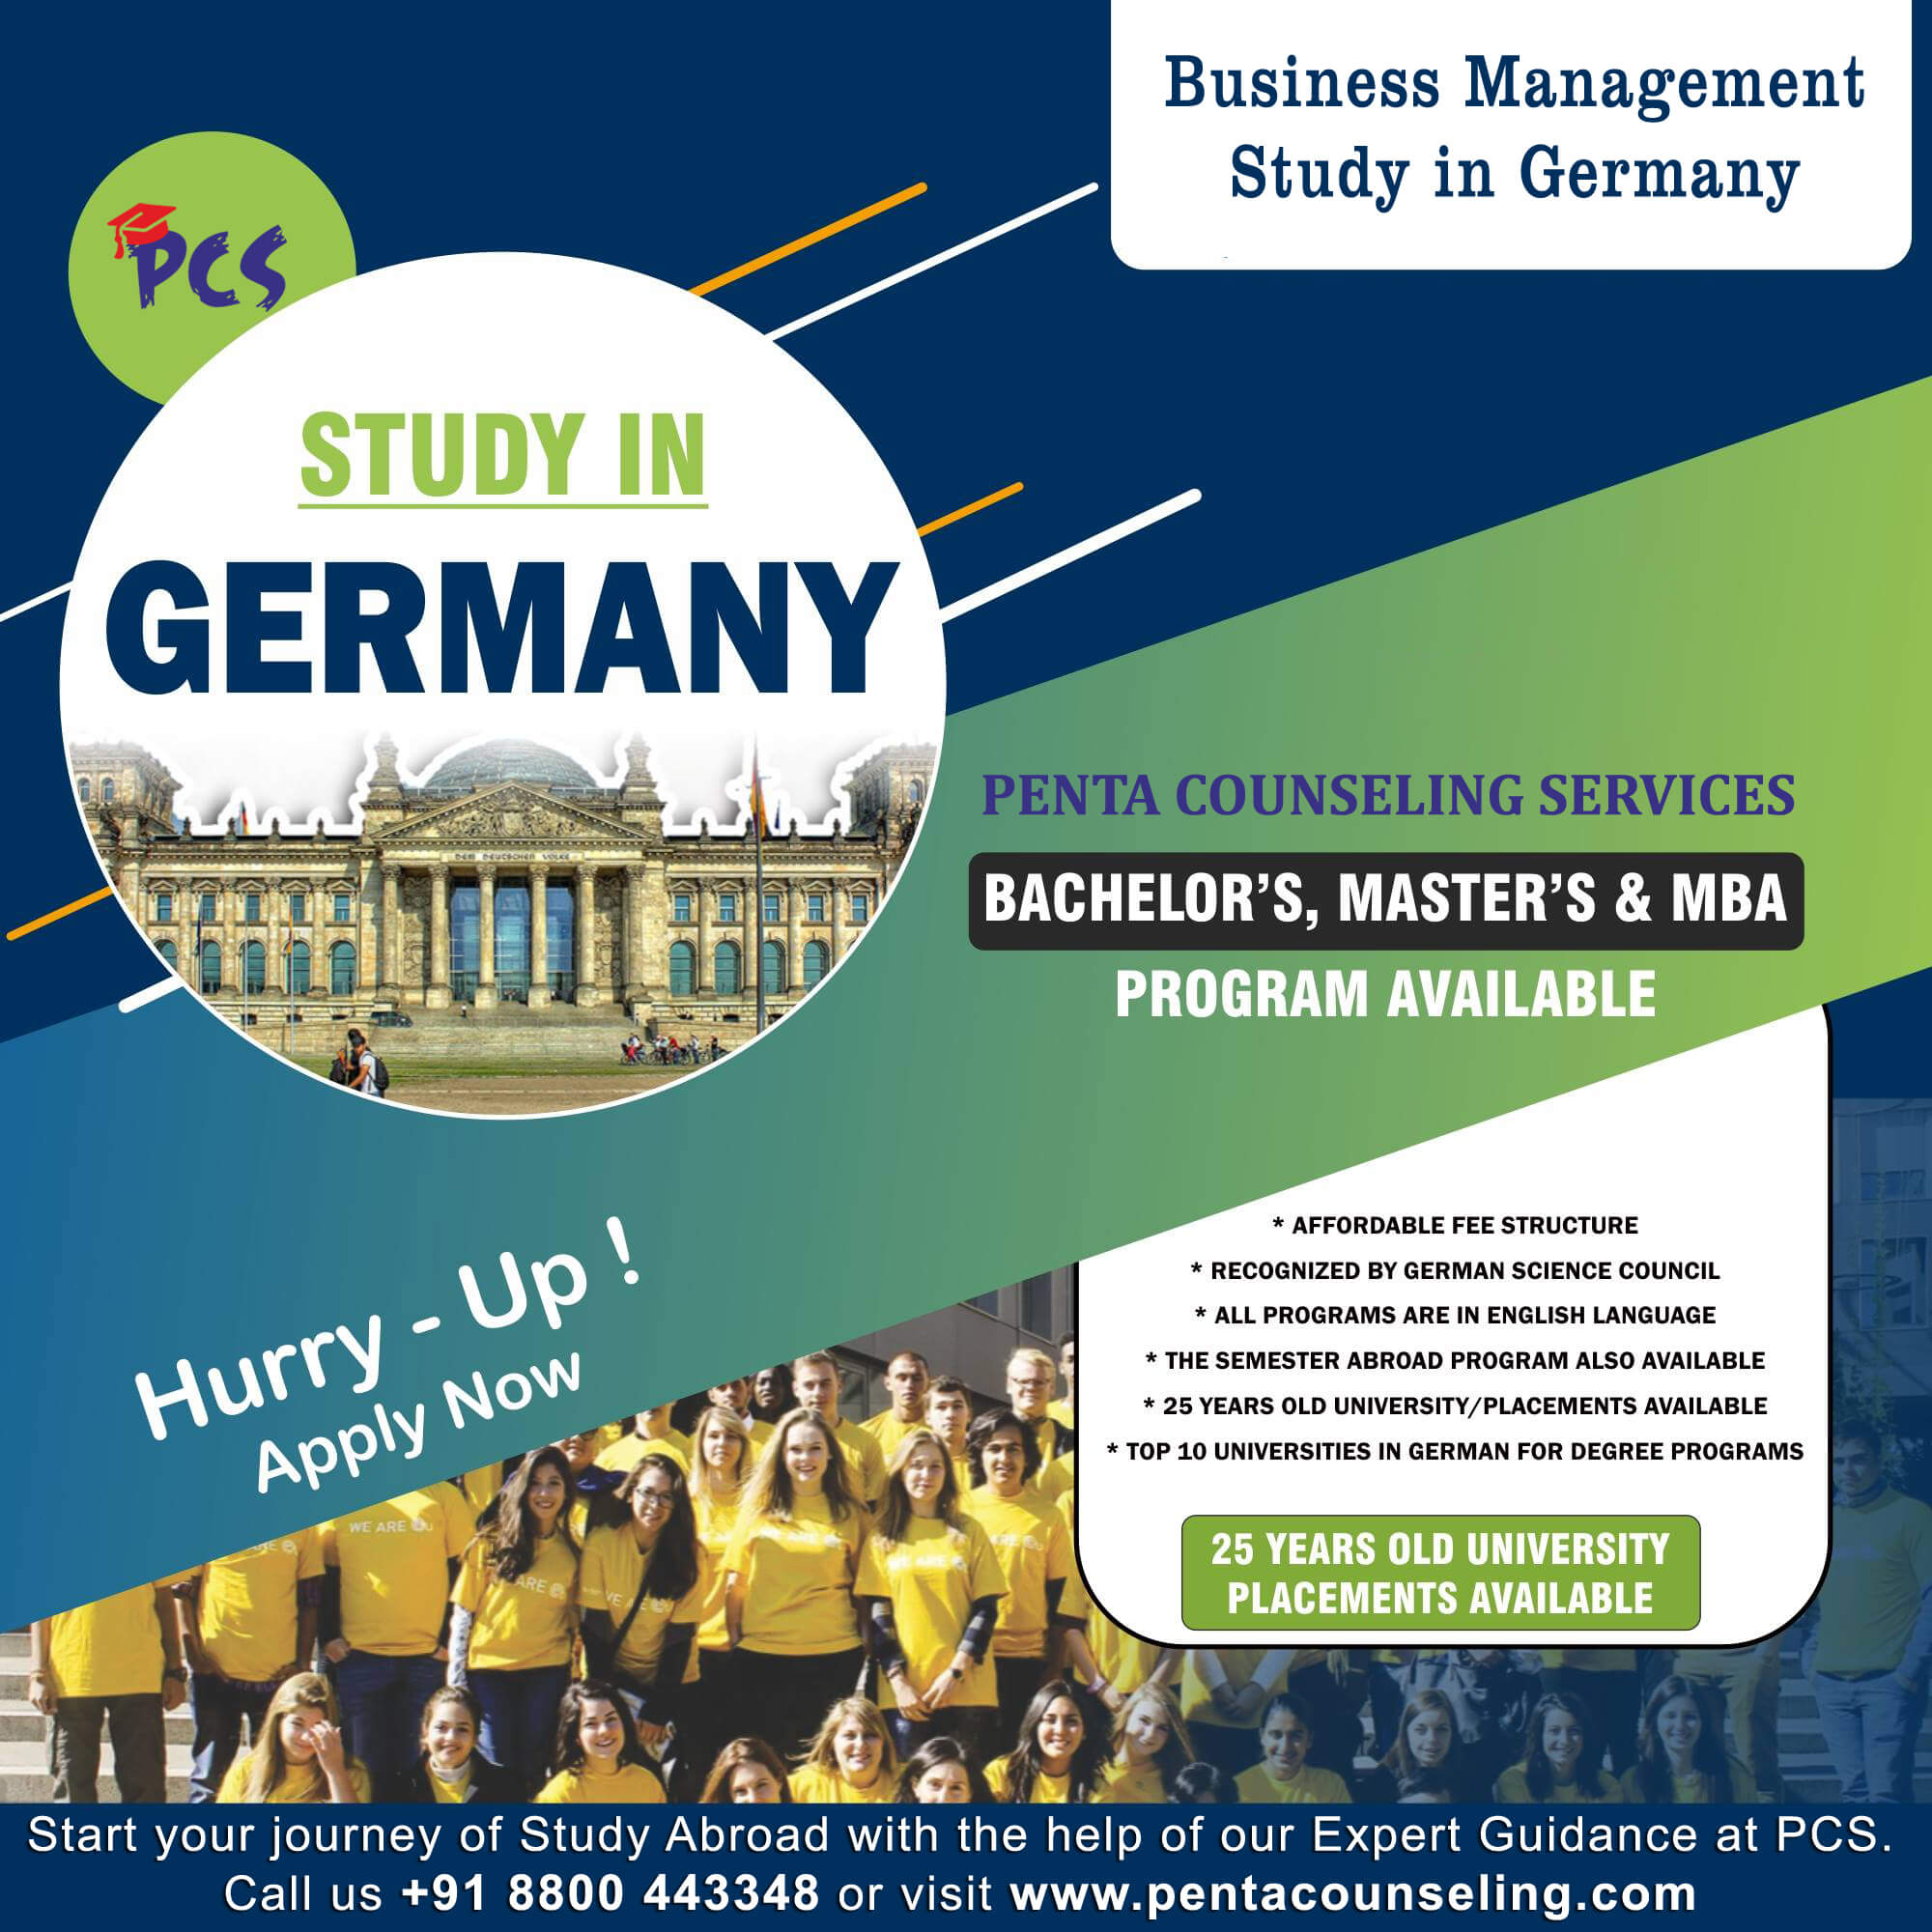 Business Management Studies in Germany